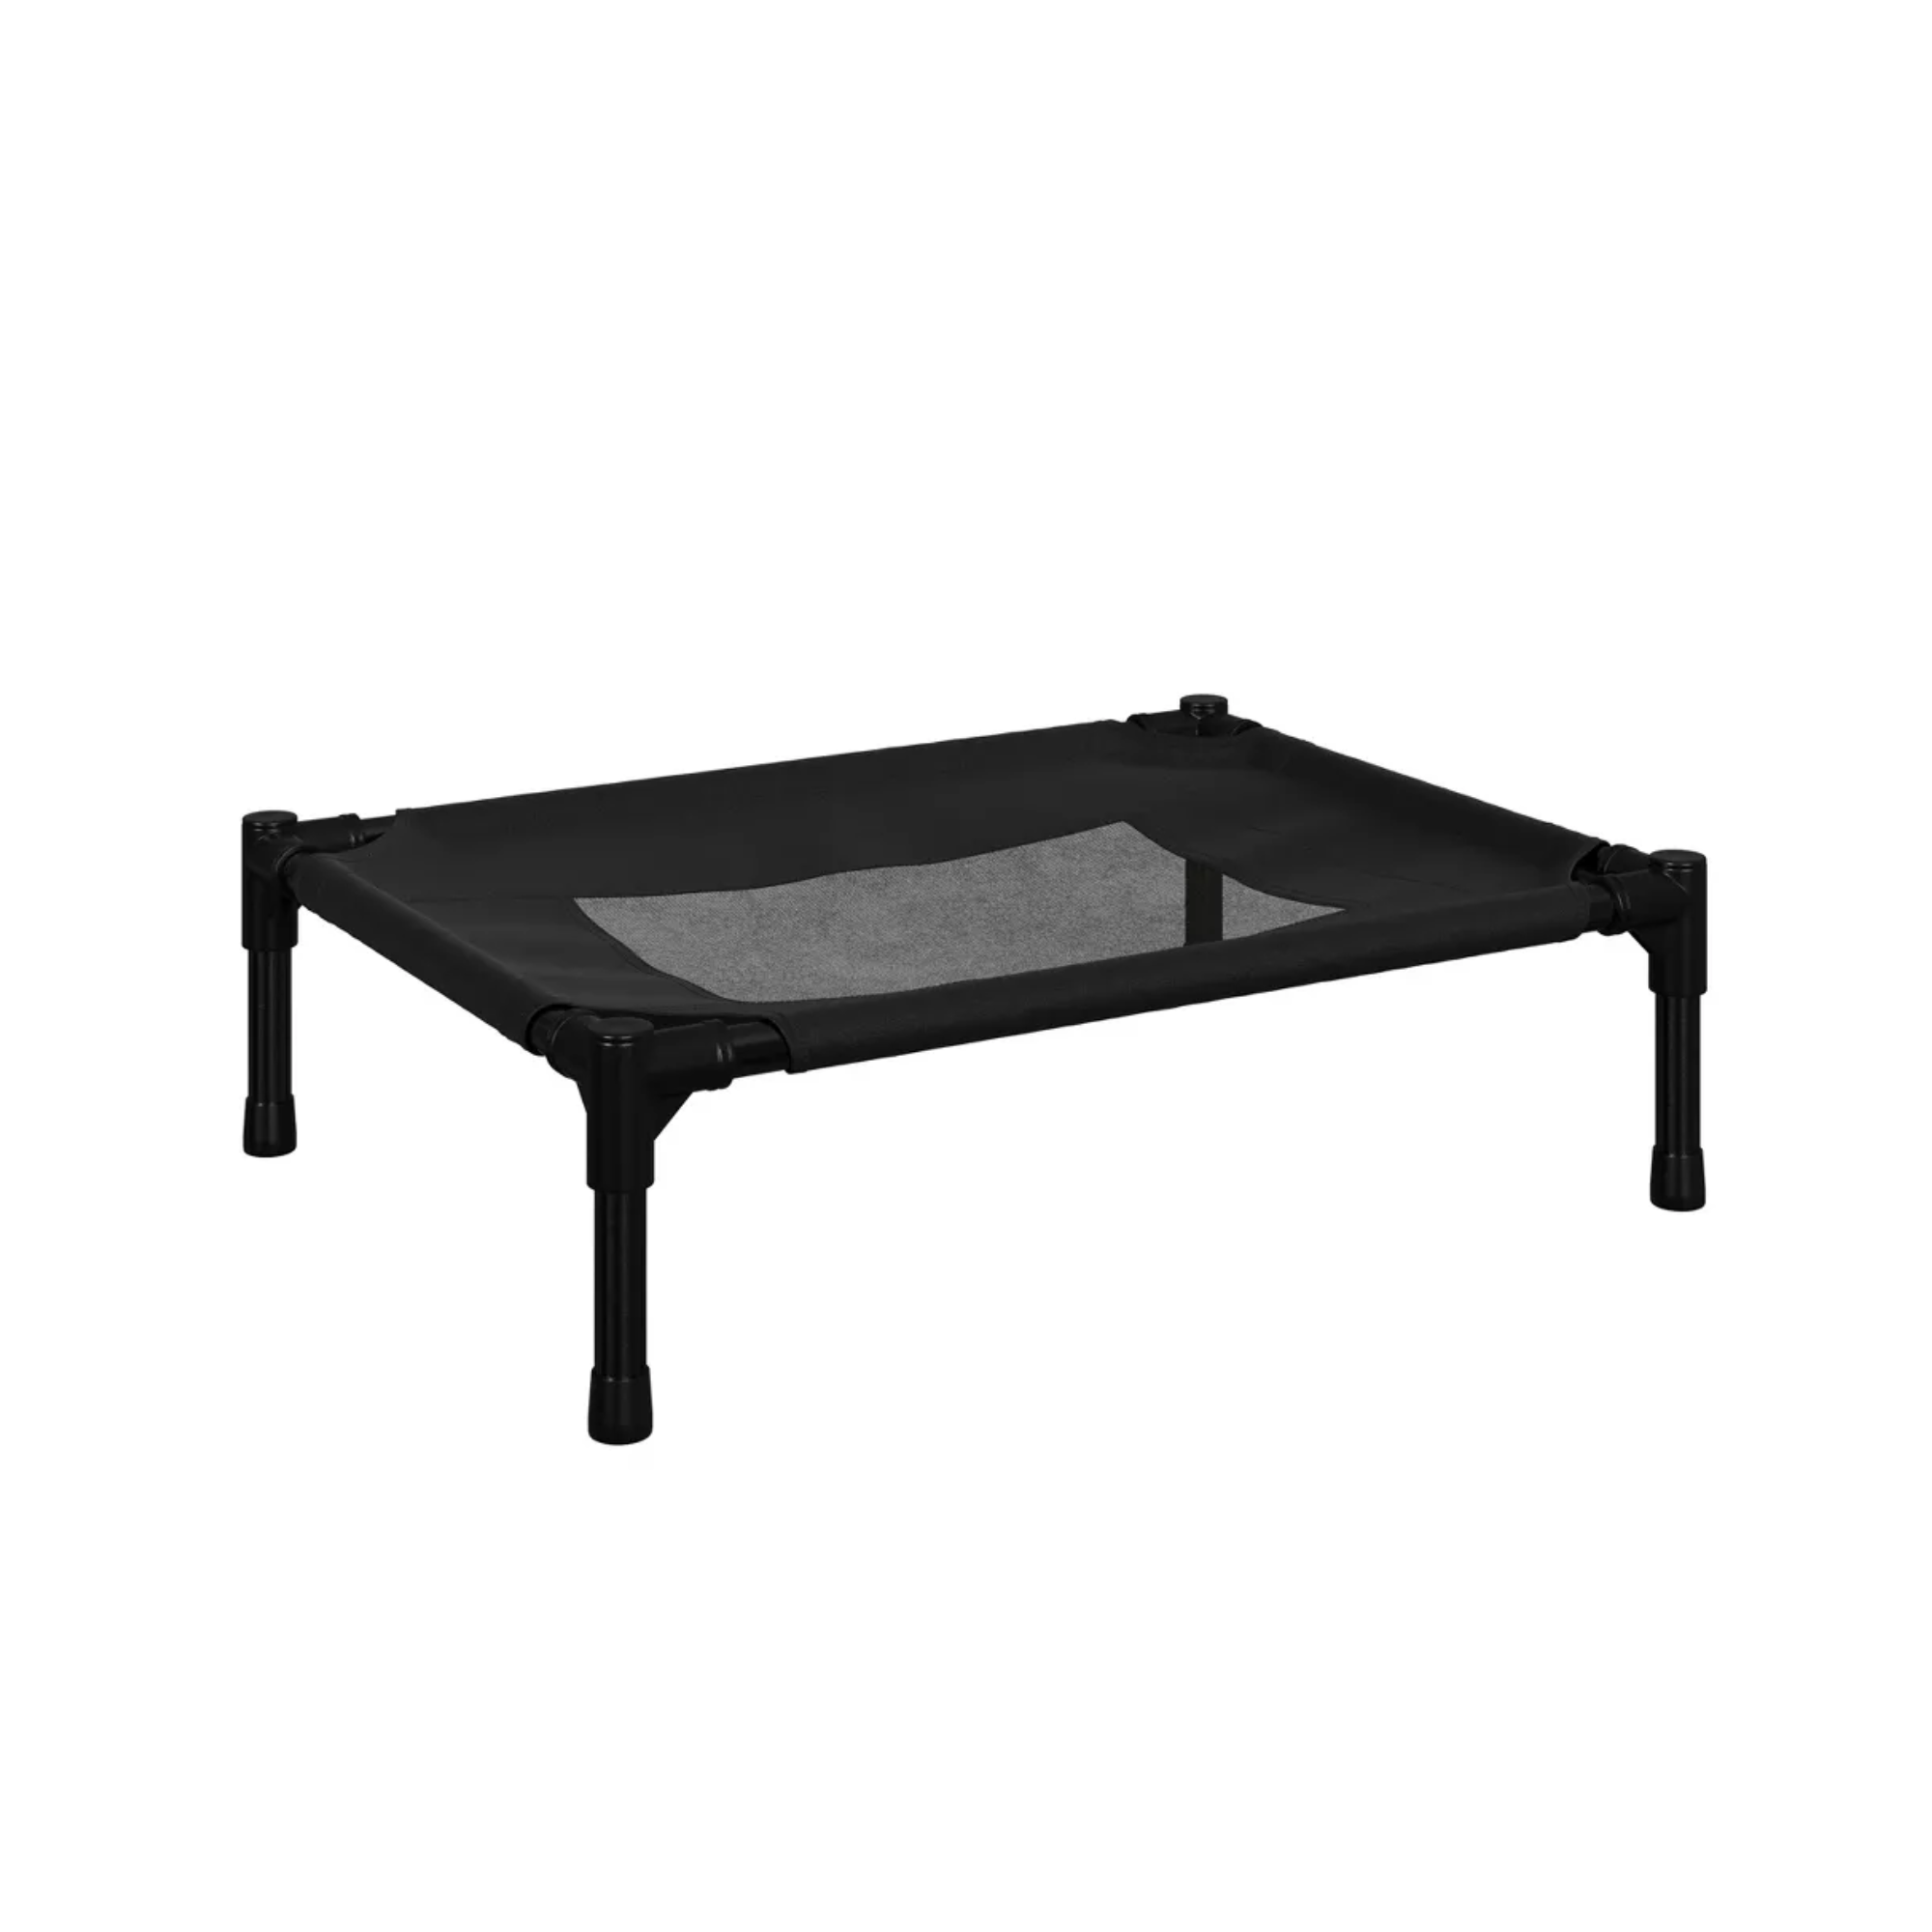 A black elevated dog bed